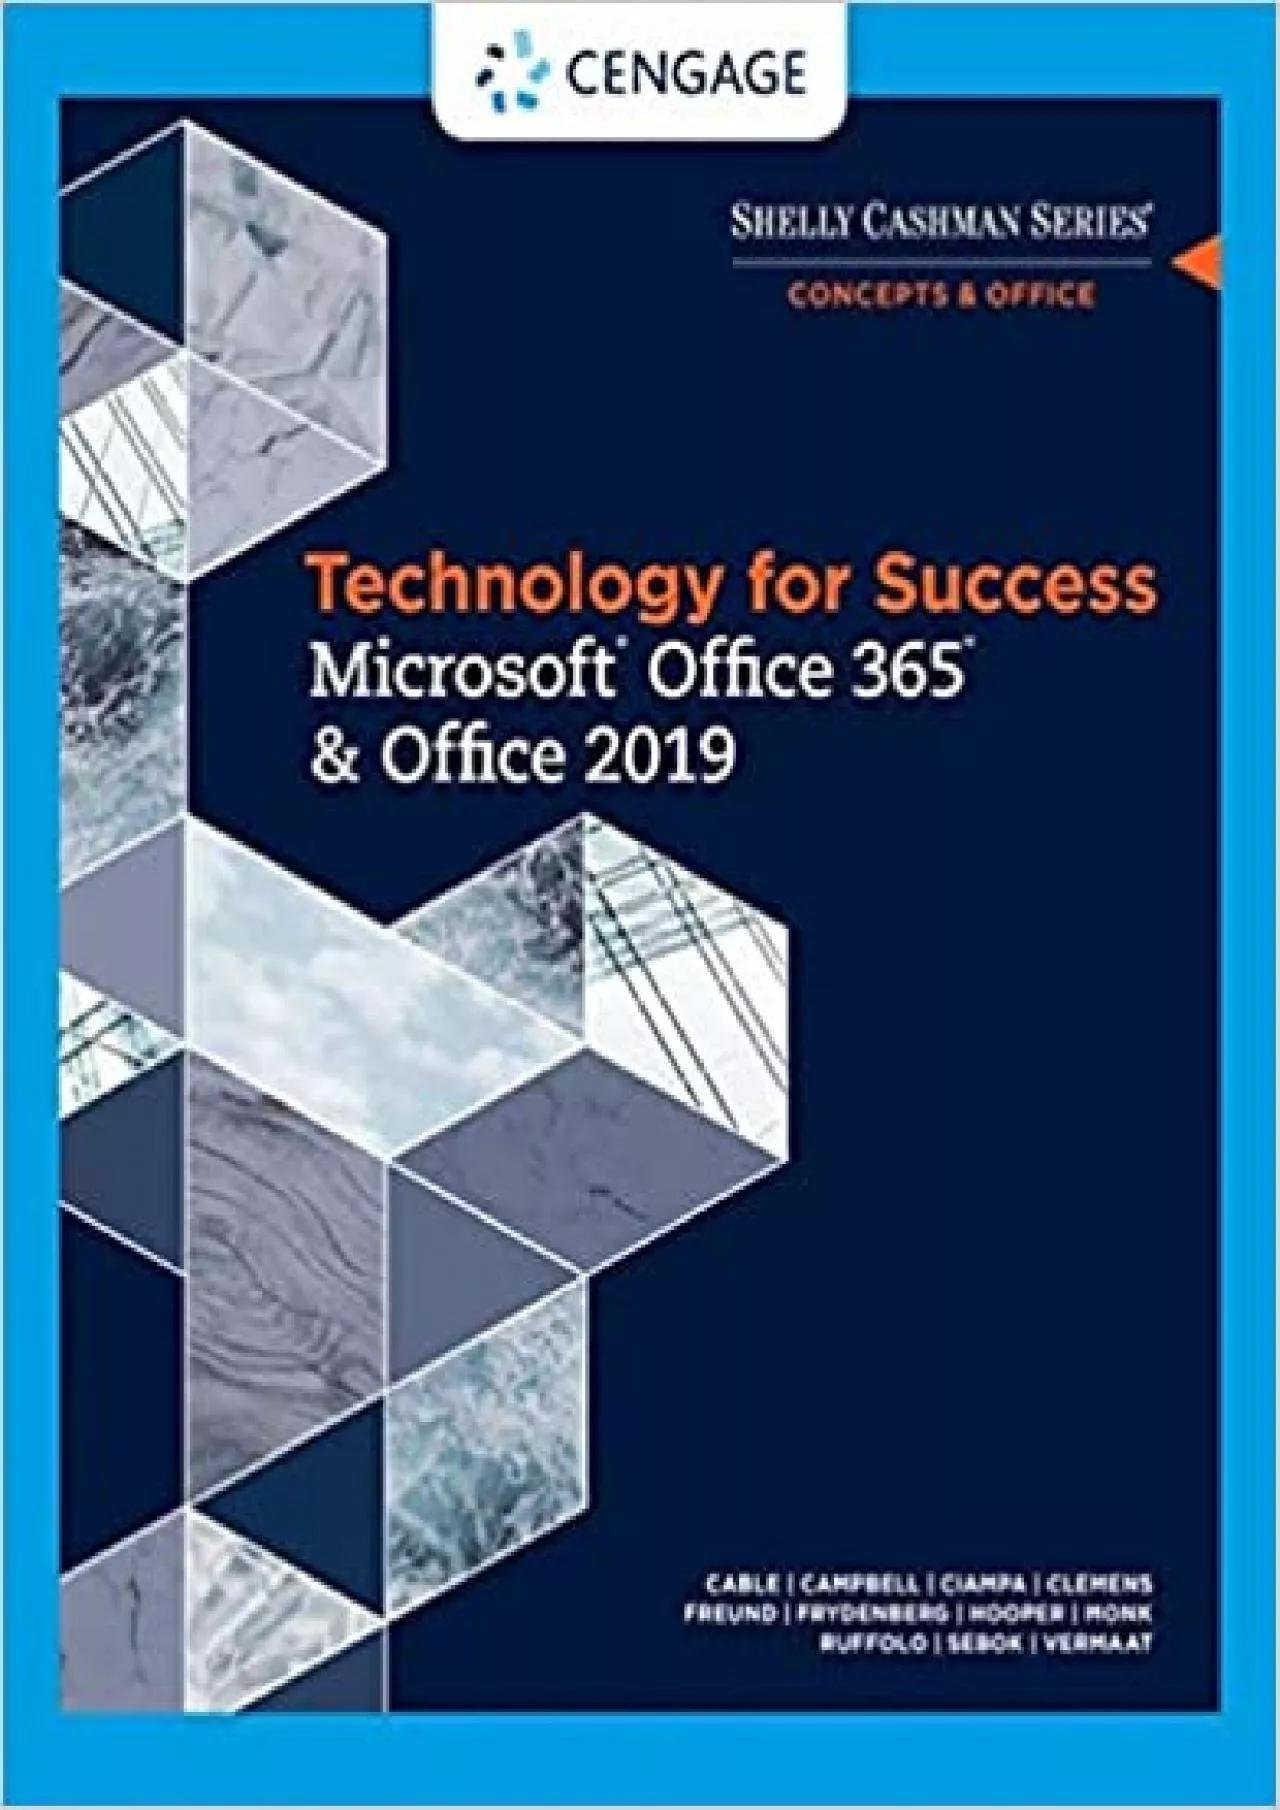 Technology for Success and Shelly Cashman Series MicrosoftOffice 365 & Office 2019 (MindTap